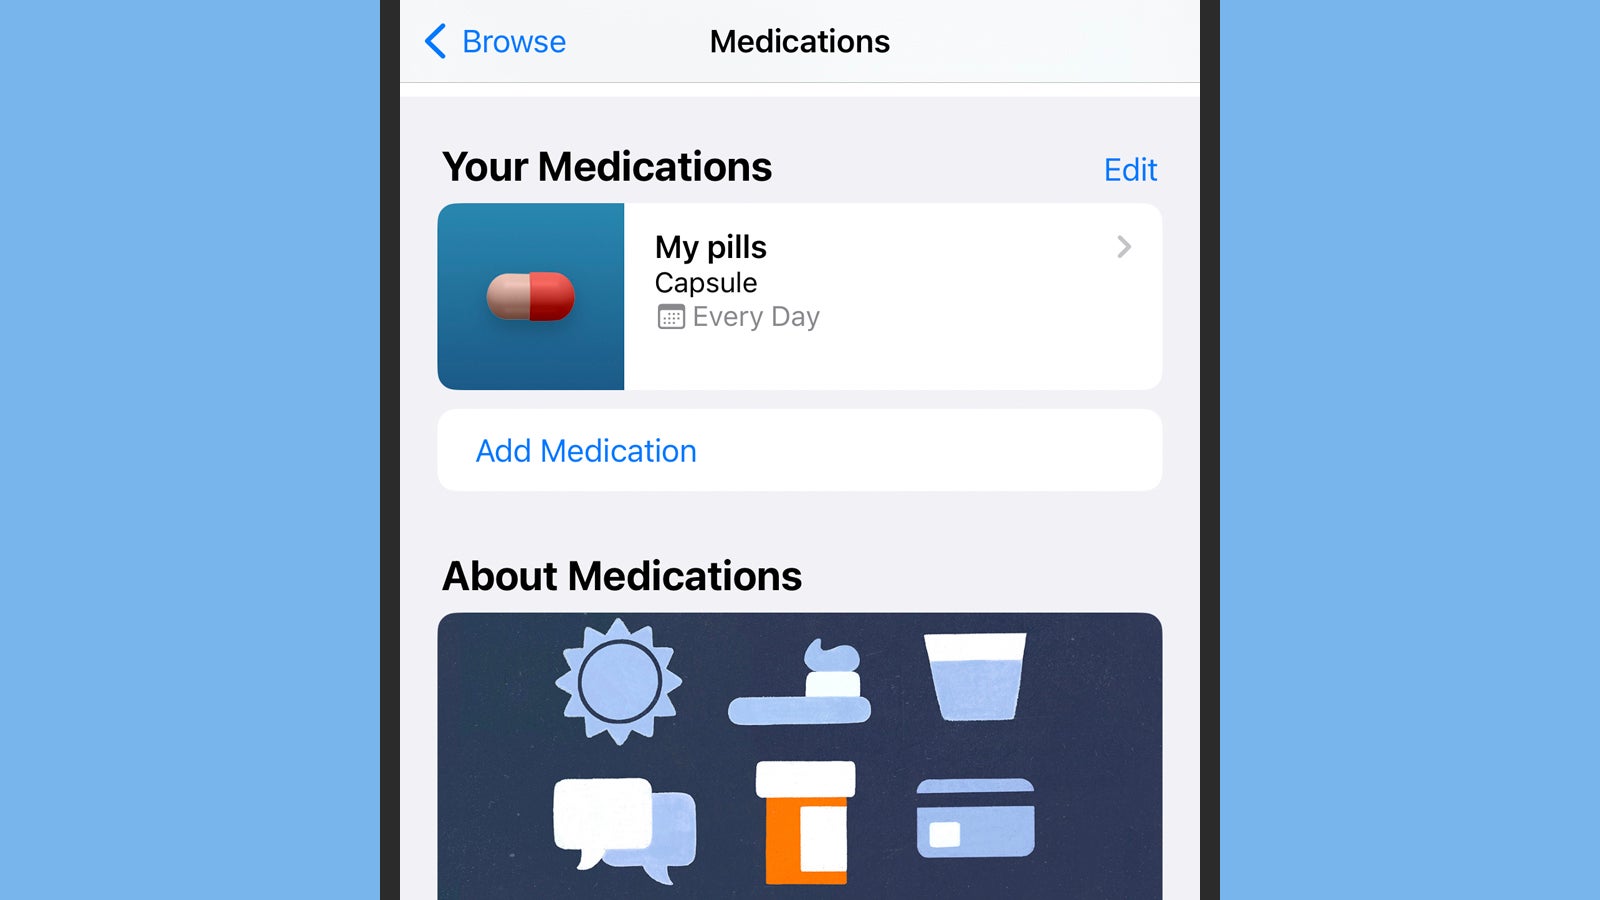 Don't lose track of where you're up to with your medication. (Screenshot: iOS)